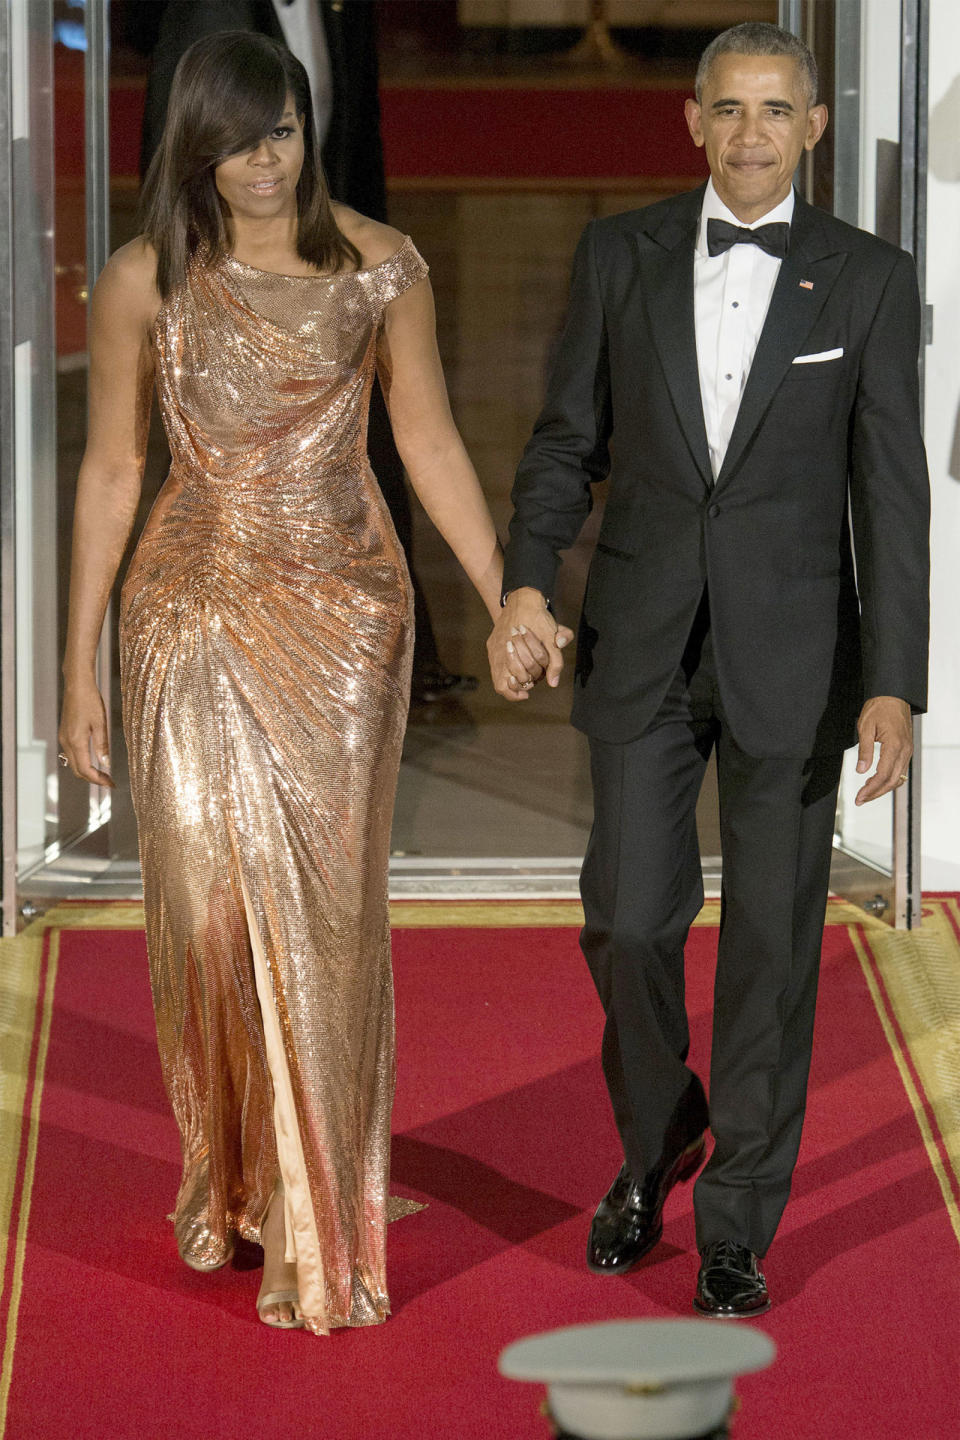 Michelle Obama Has Her Sparkling Moment